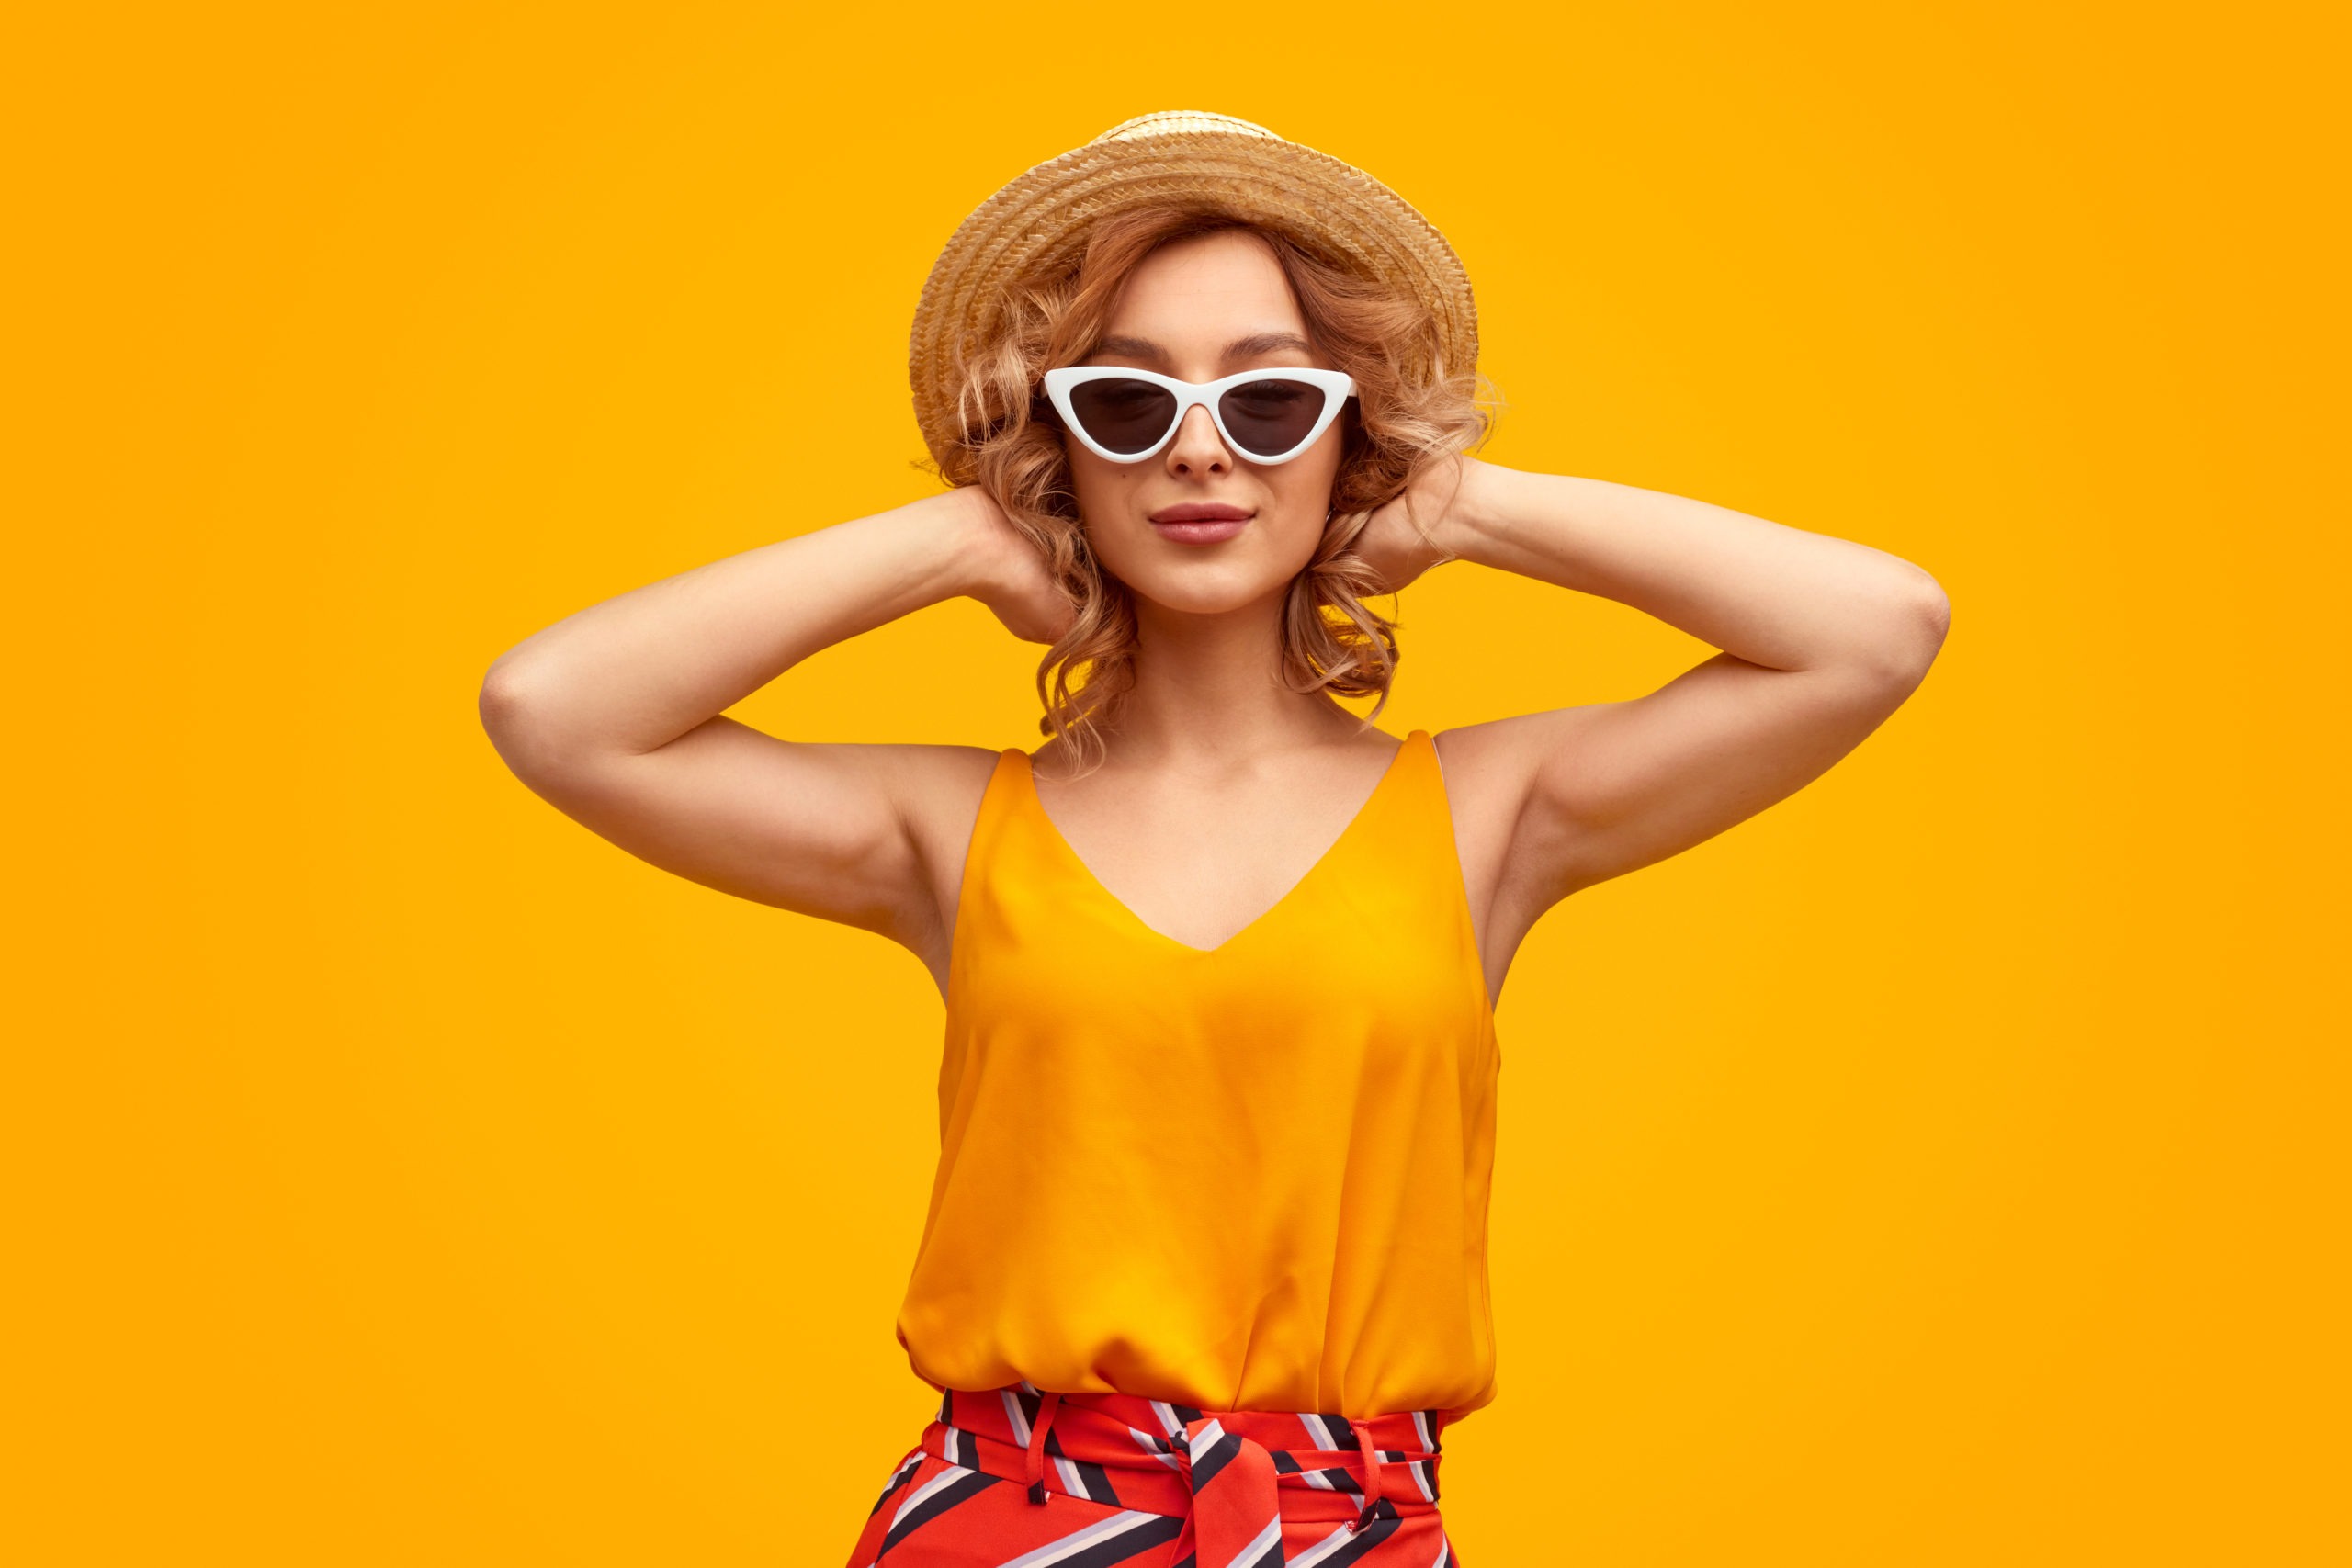 a woman in a stylish outfit and hat looking at the camera and adjusting her wavy blond hair against a vivid yellow background